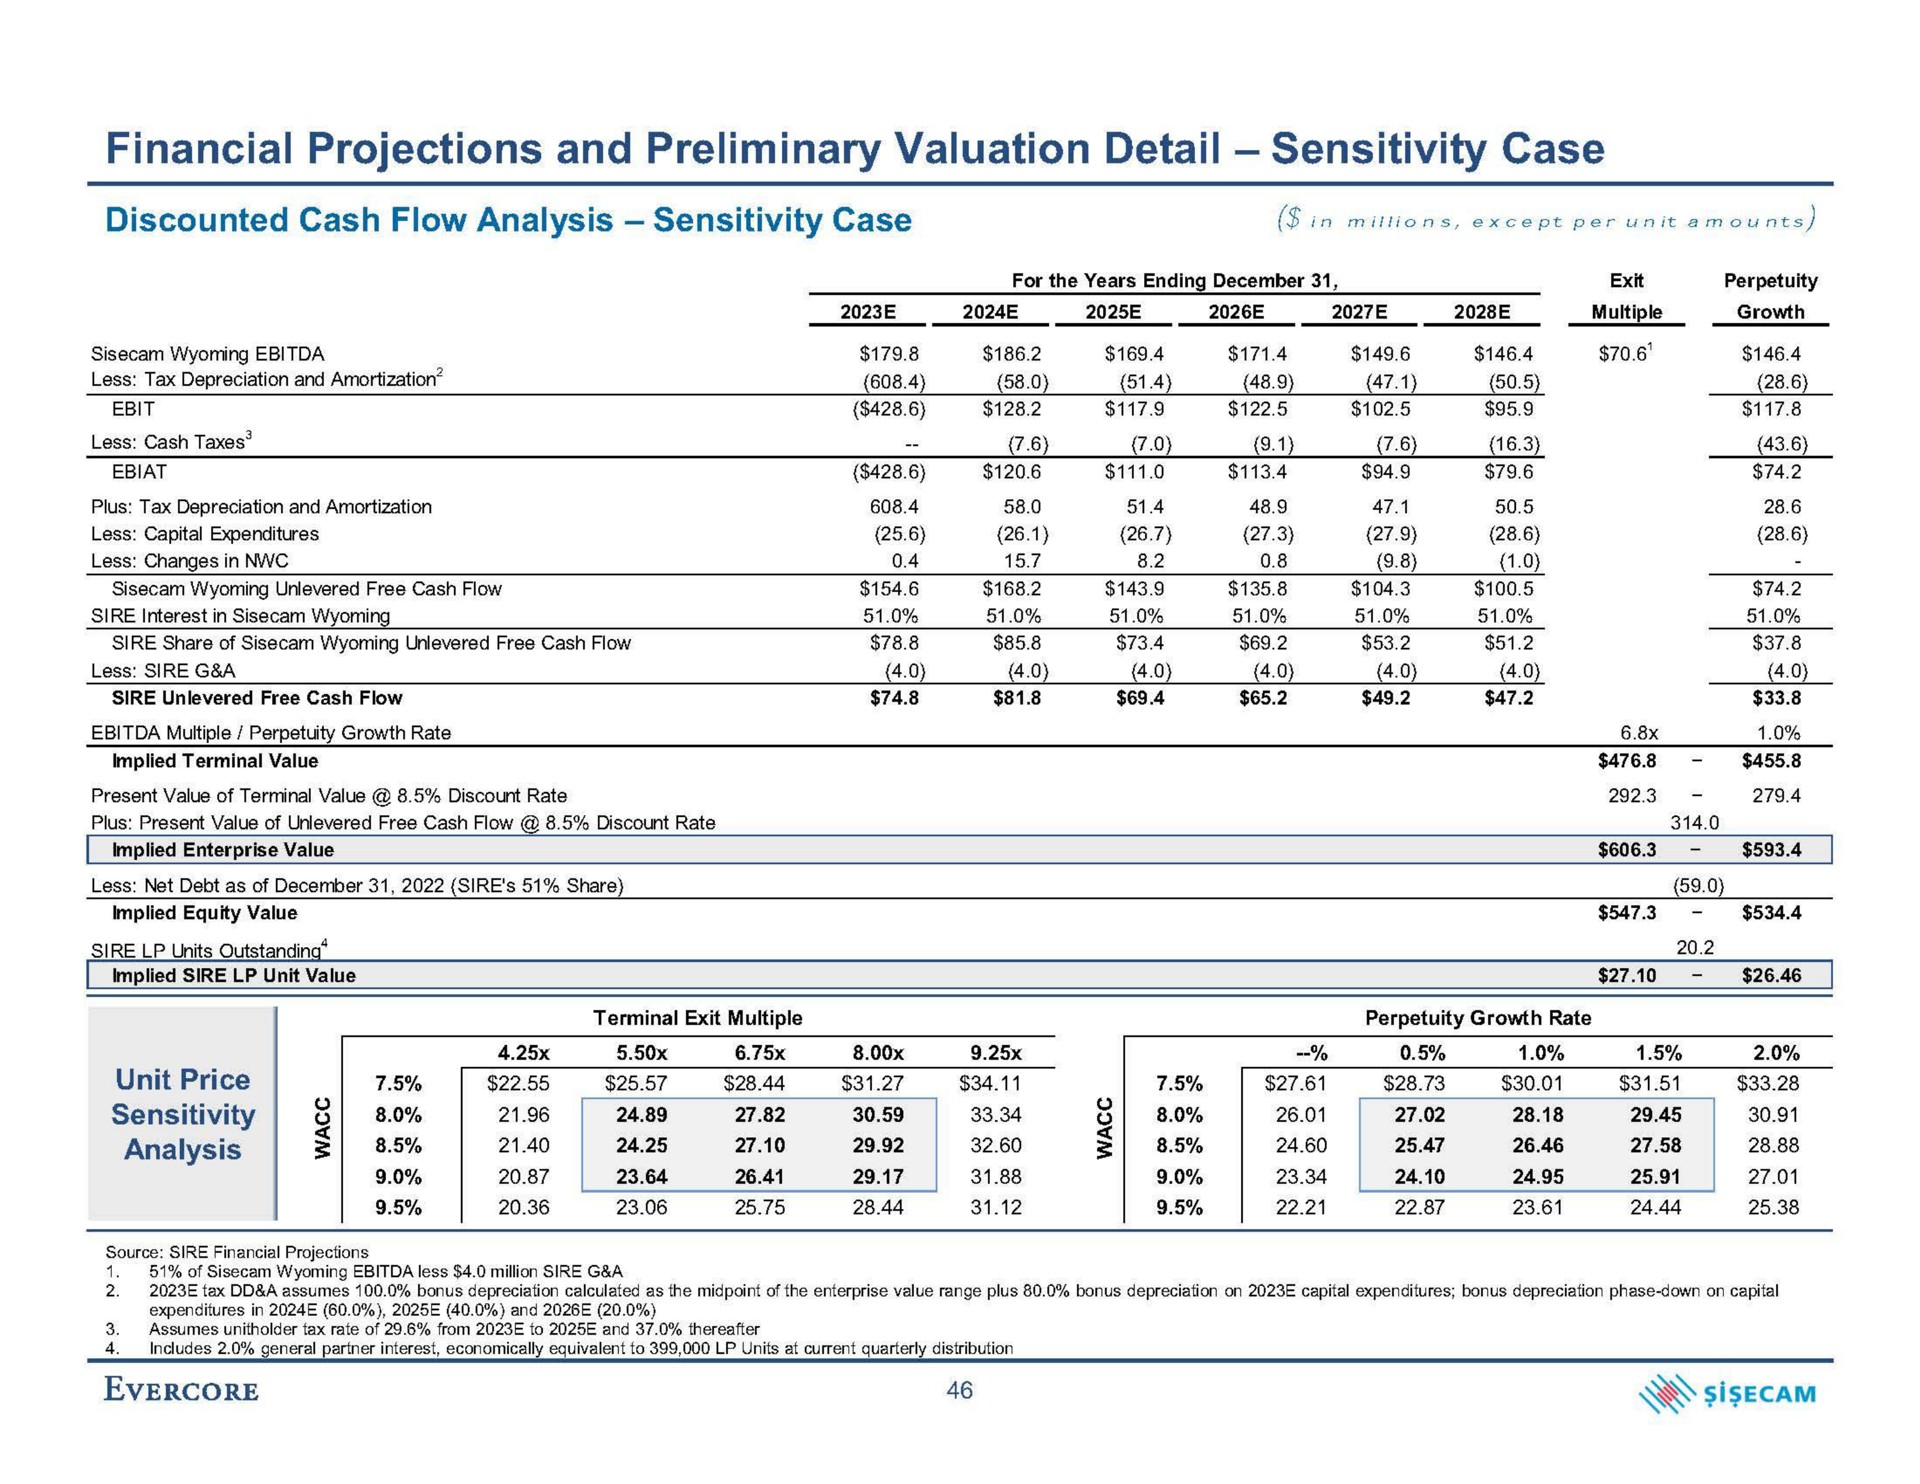 financial projections and preliminary valuation detail sensitivity case discounted cash flow analysis sensitivity case | Evercore